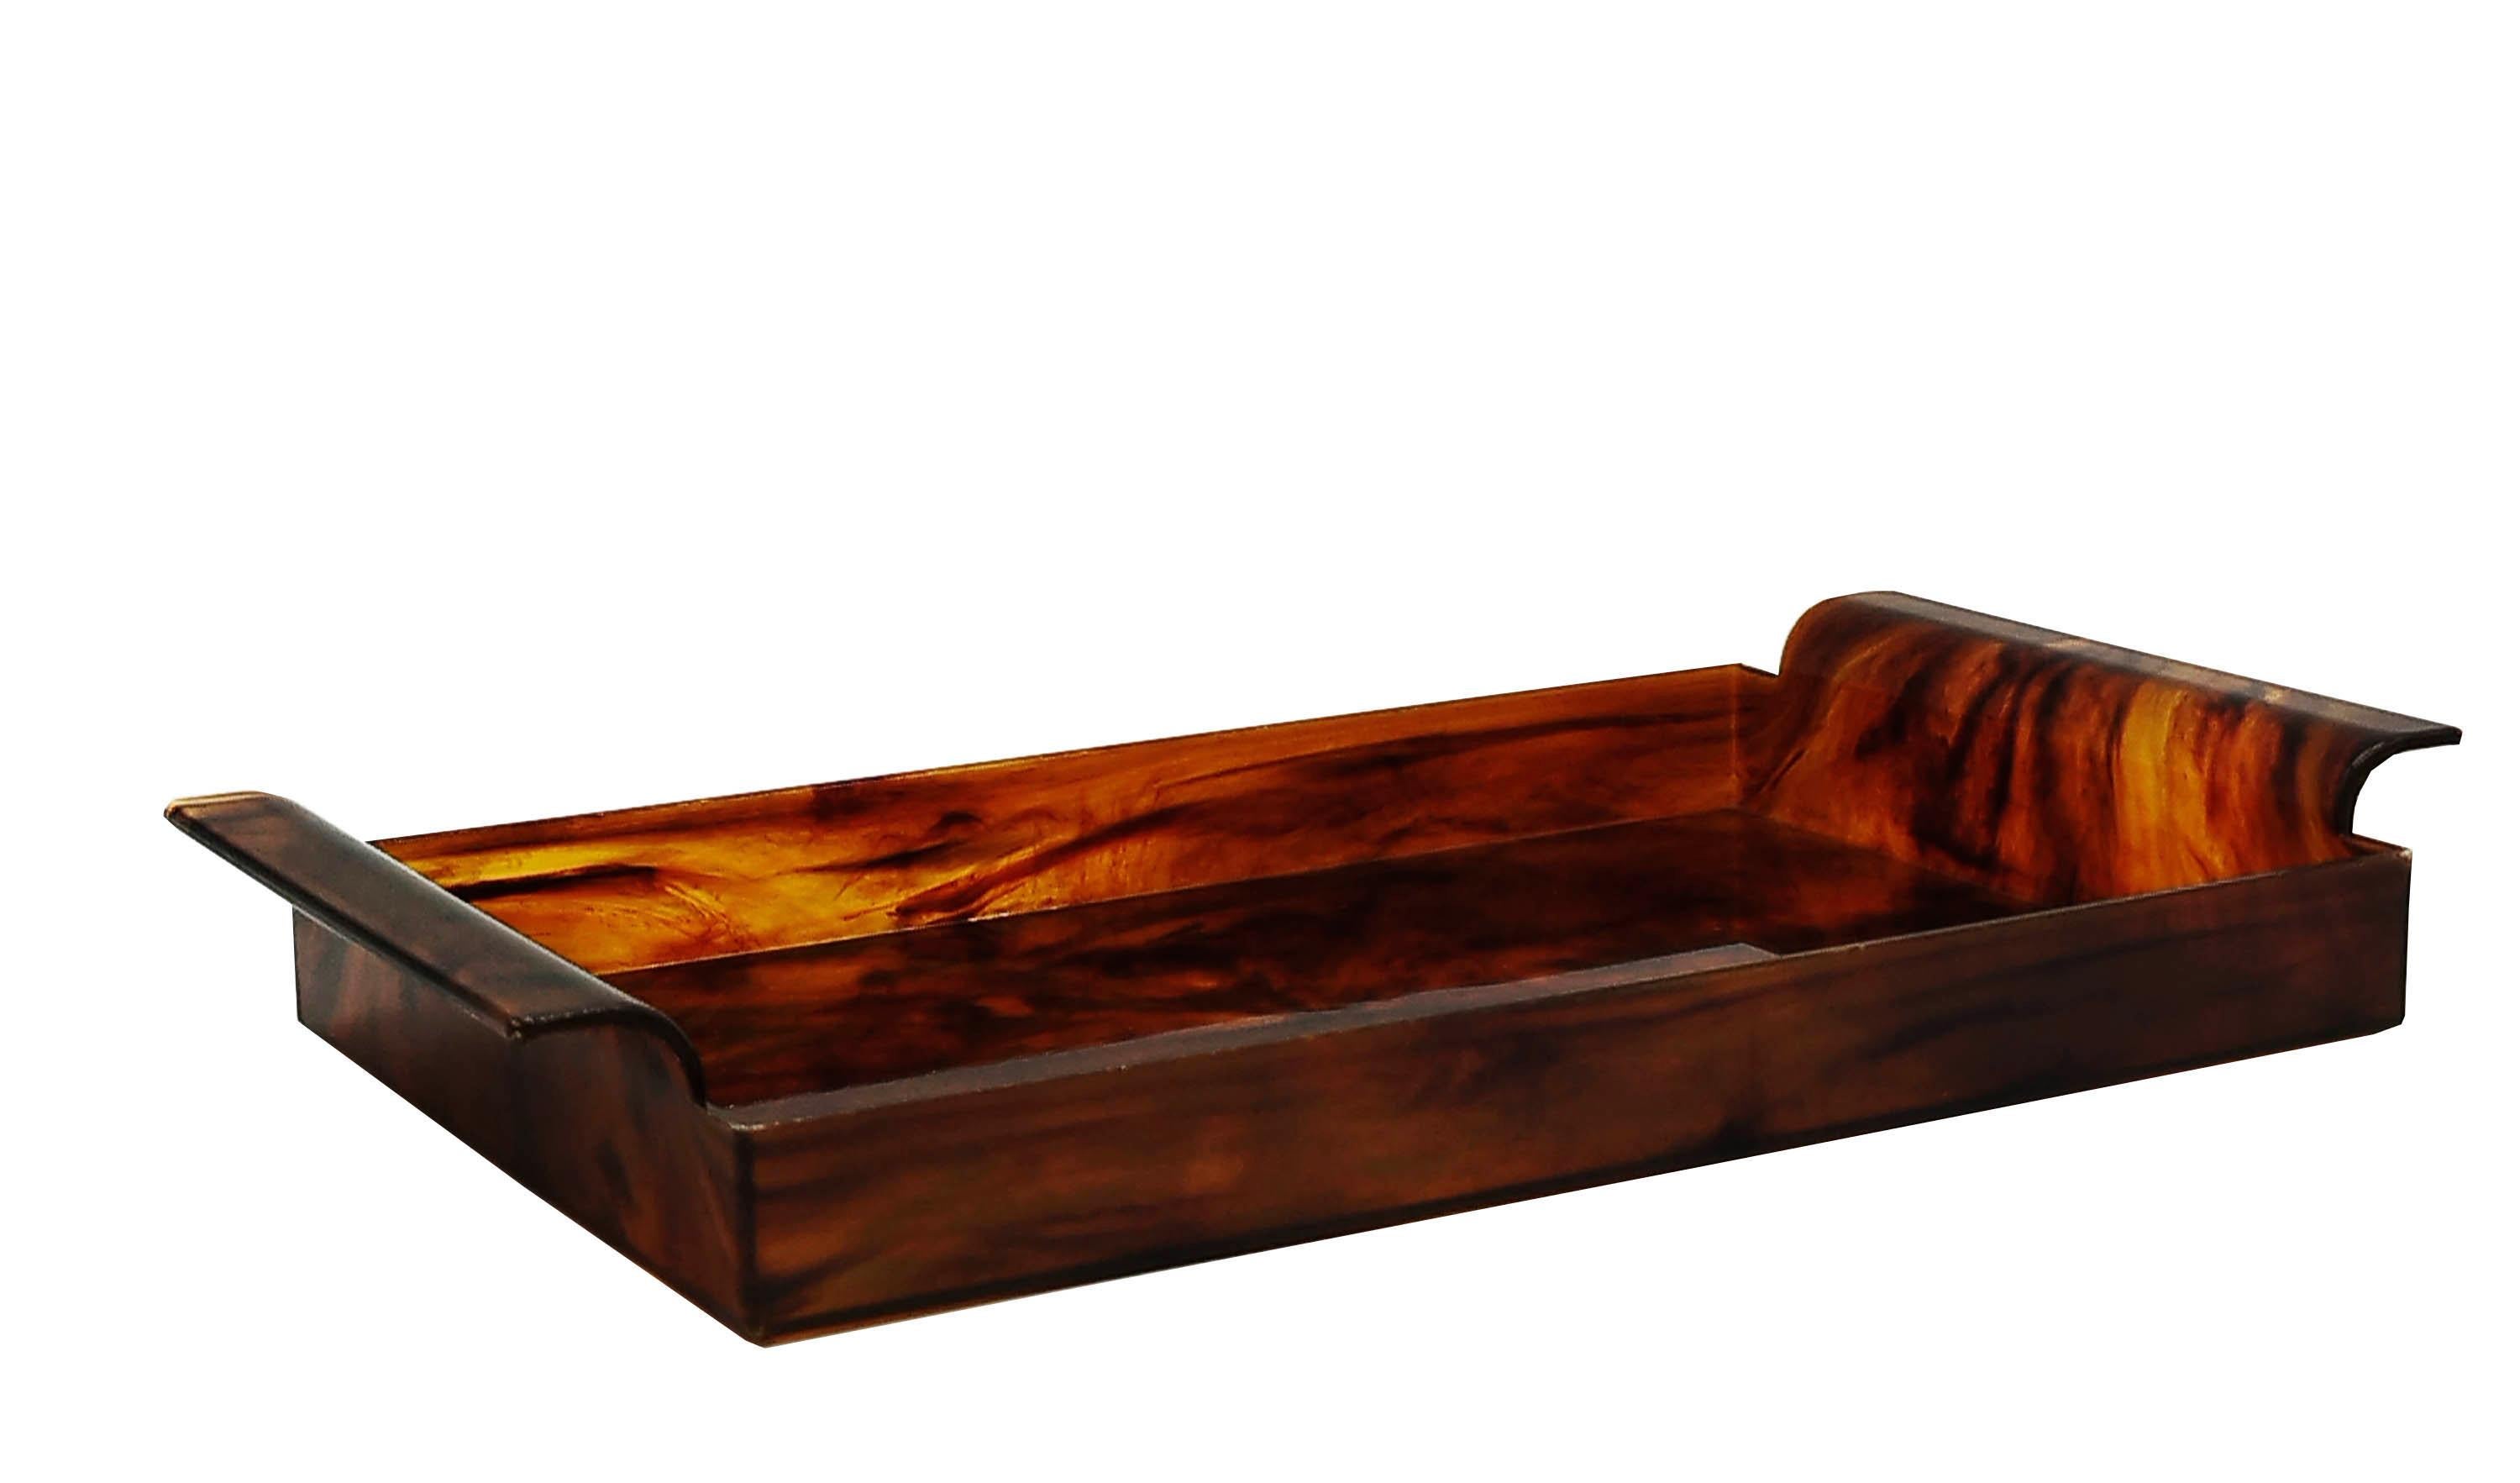 An incredible tortoiseshell lucite serving tray, this piece was produced in Italy in the 1970s and its design is attributed to Willy Rizzo, Gabriella Crespi, Tommaso Barbi, Christian Dior, Pierre Cardin.